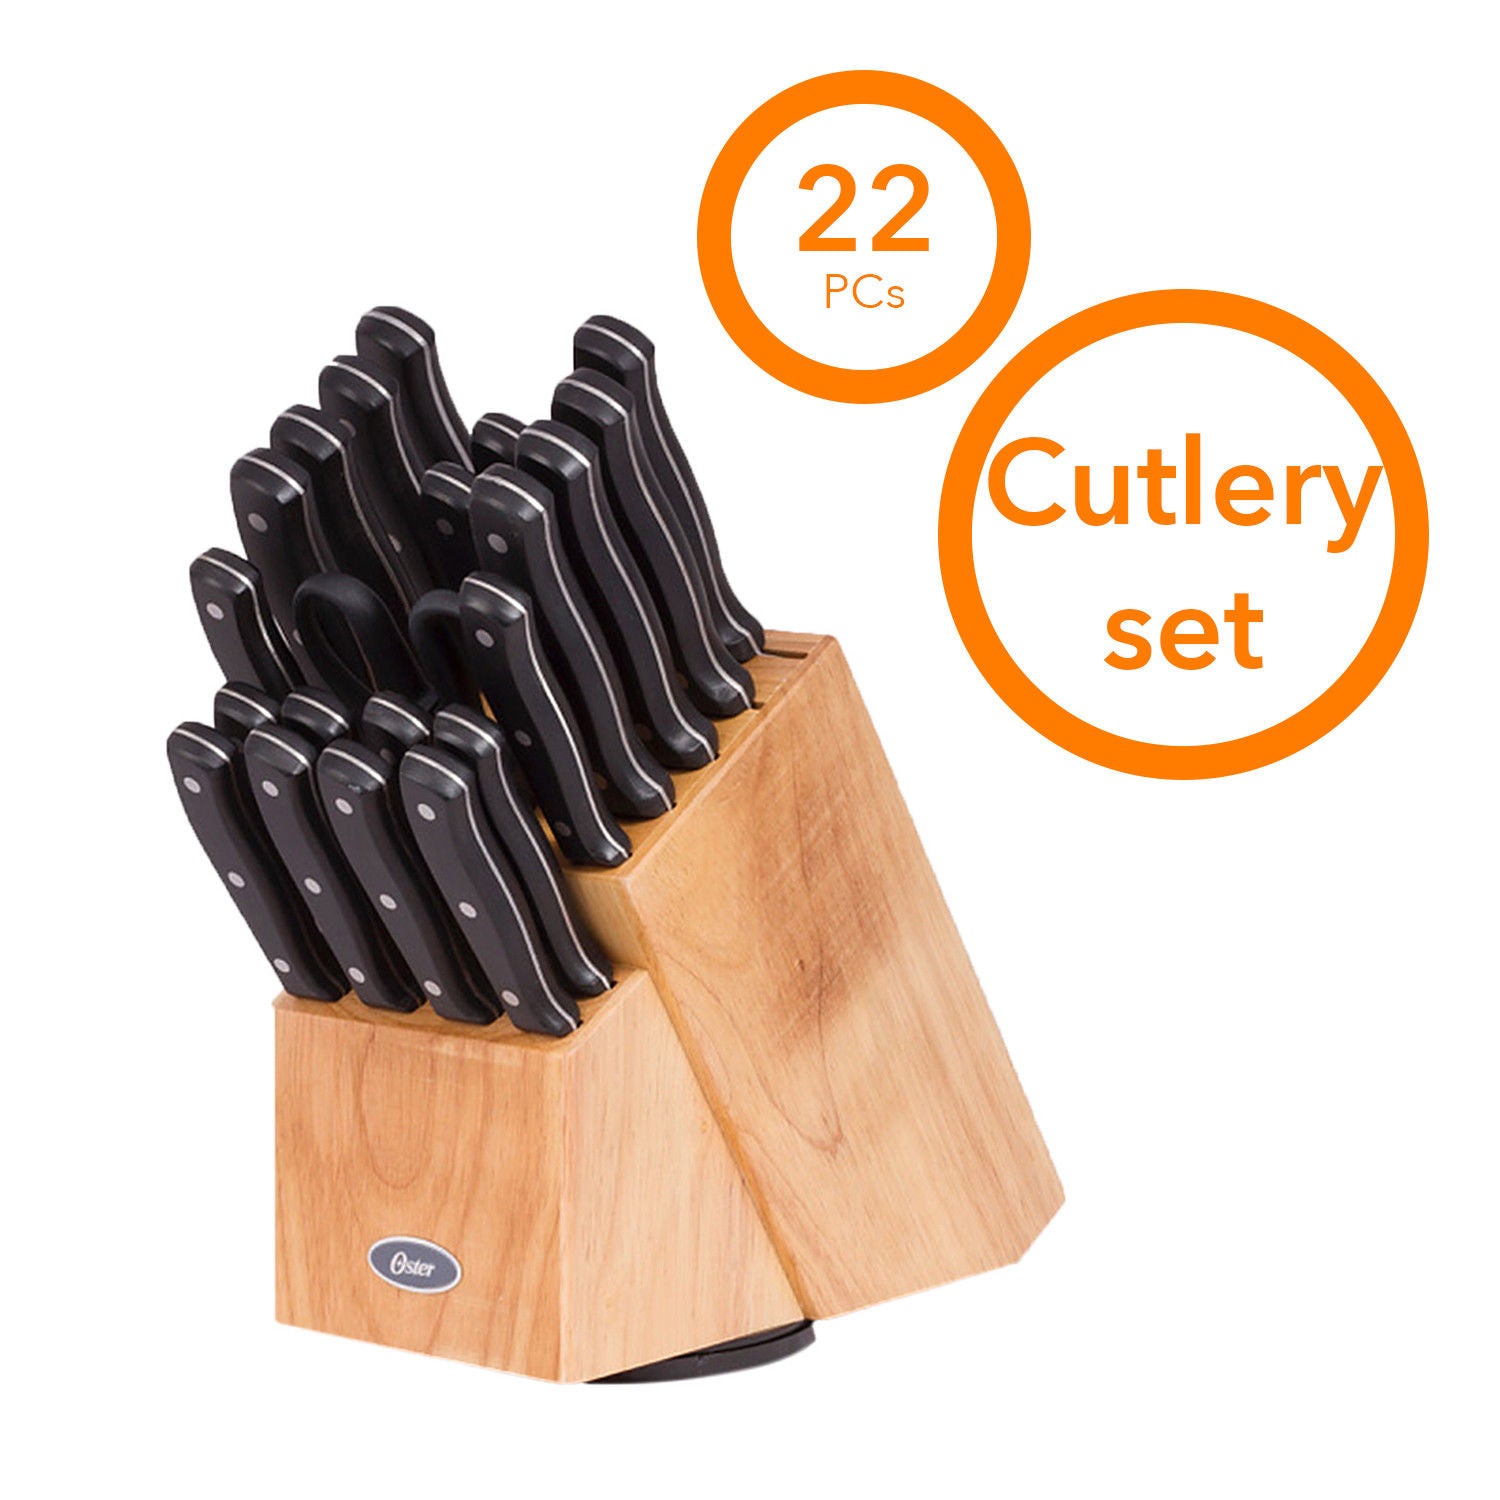 Oster 112070.22 Evansville 22 Piece Cutlery Set, Stainless Steel with Black Handles